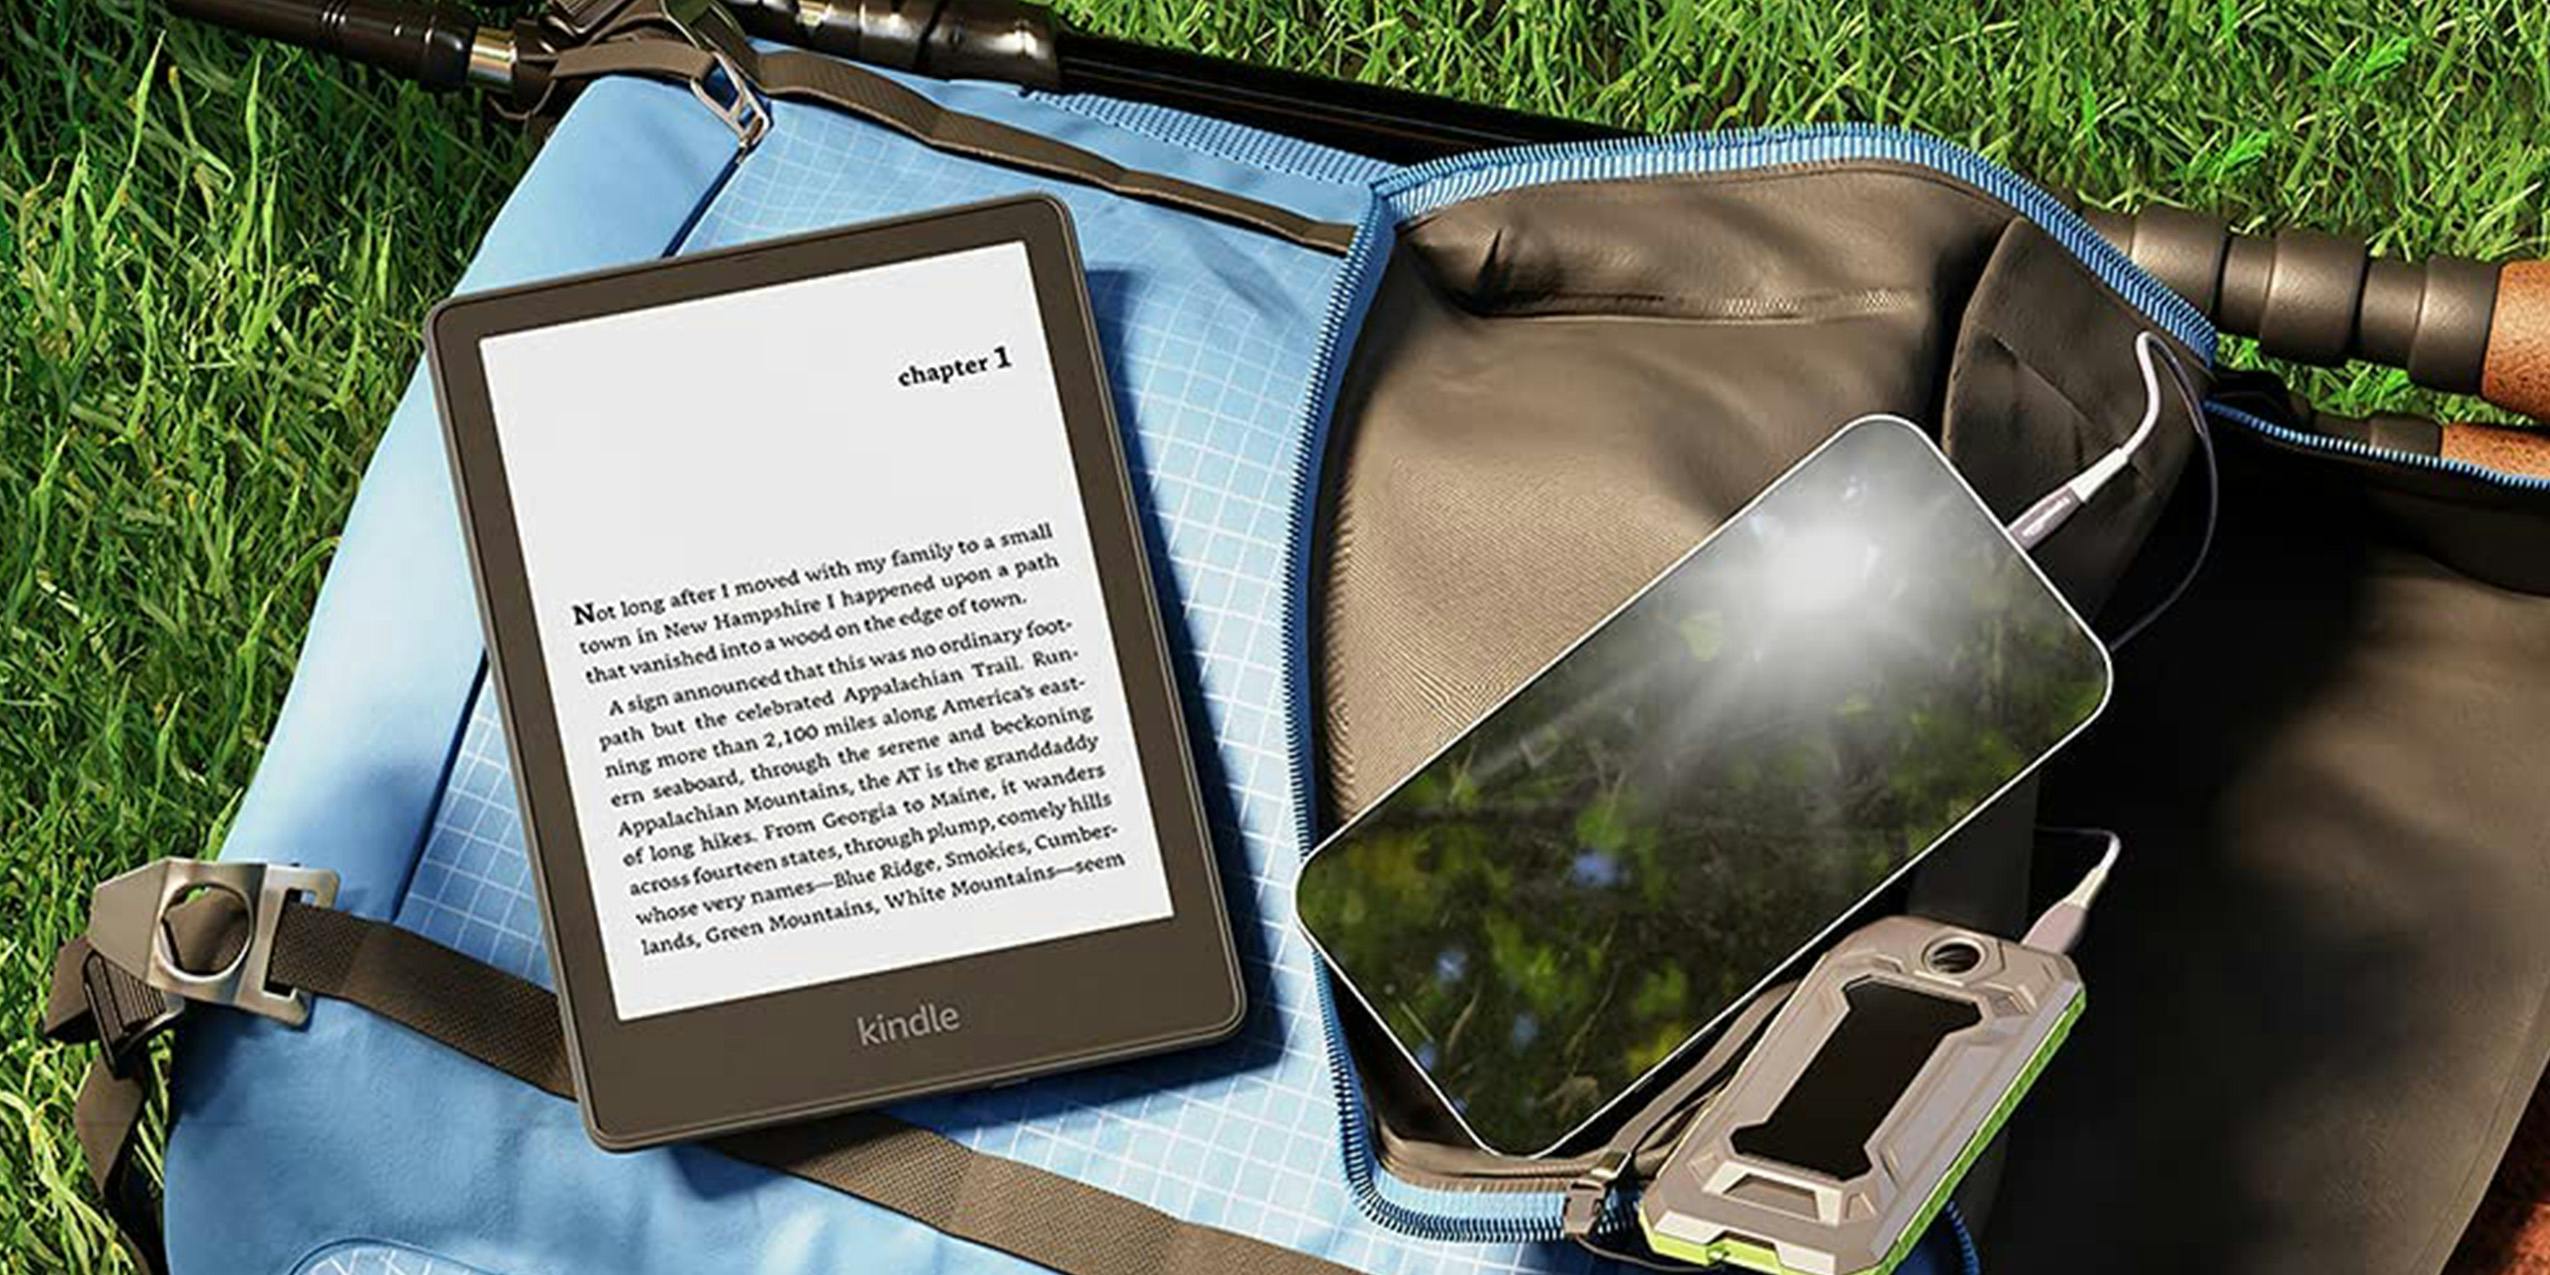 A Kindle Paperwhite used outside.